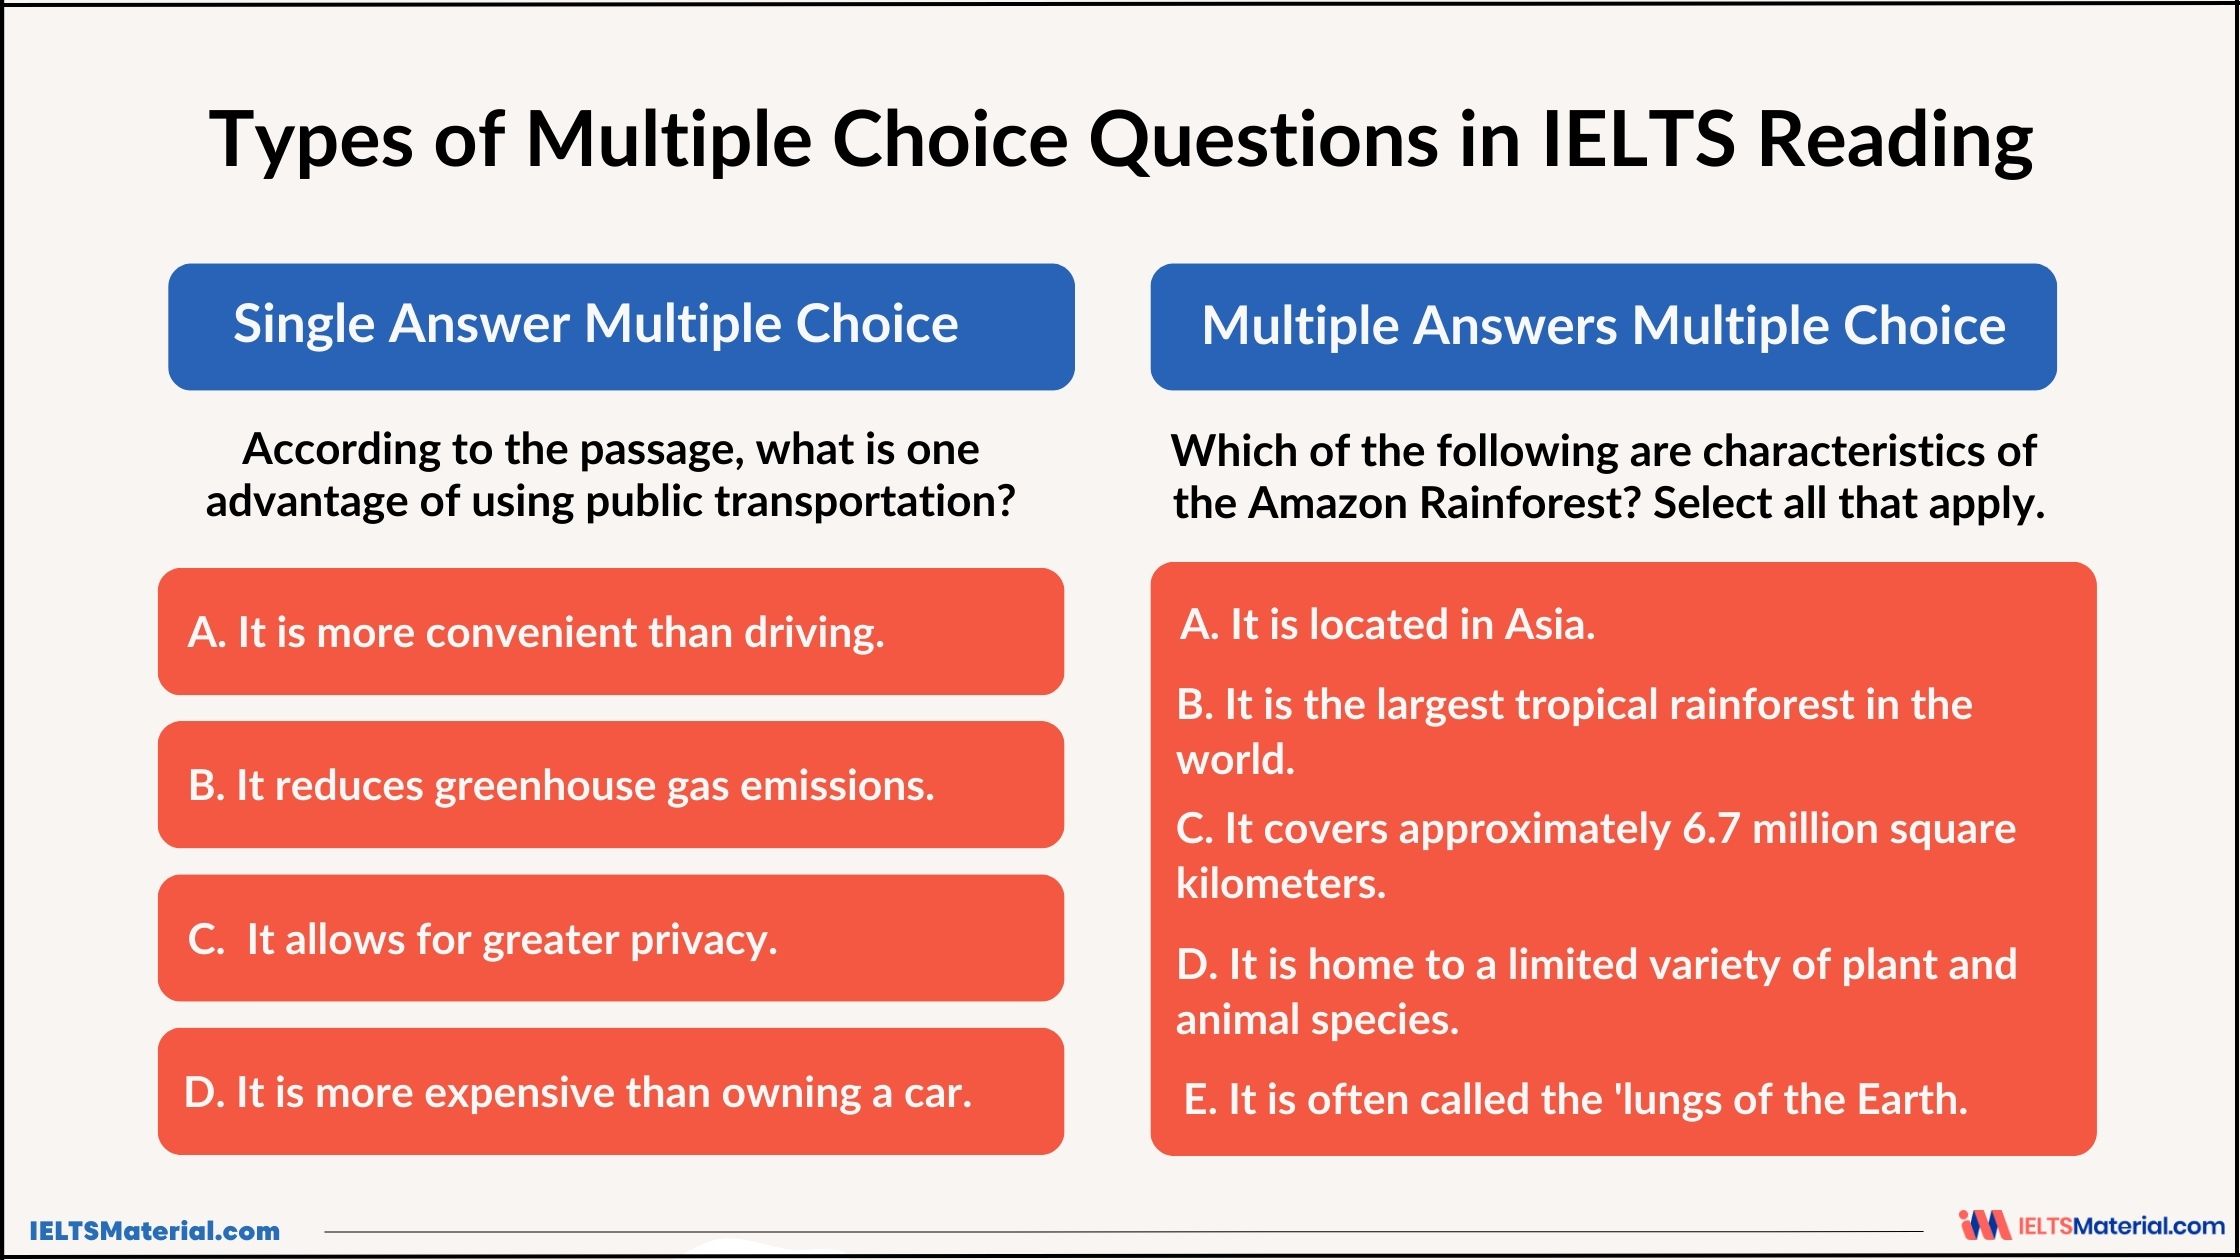 Types of Multiple Choice Questions in IELTS Reading